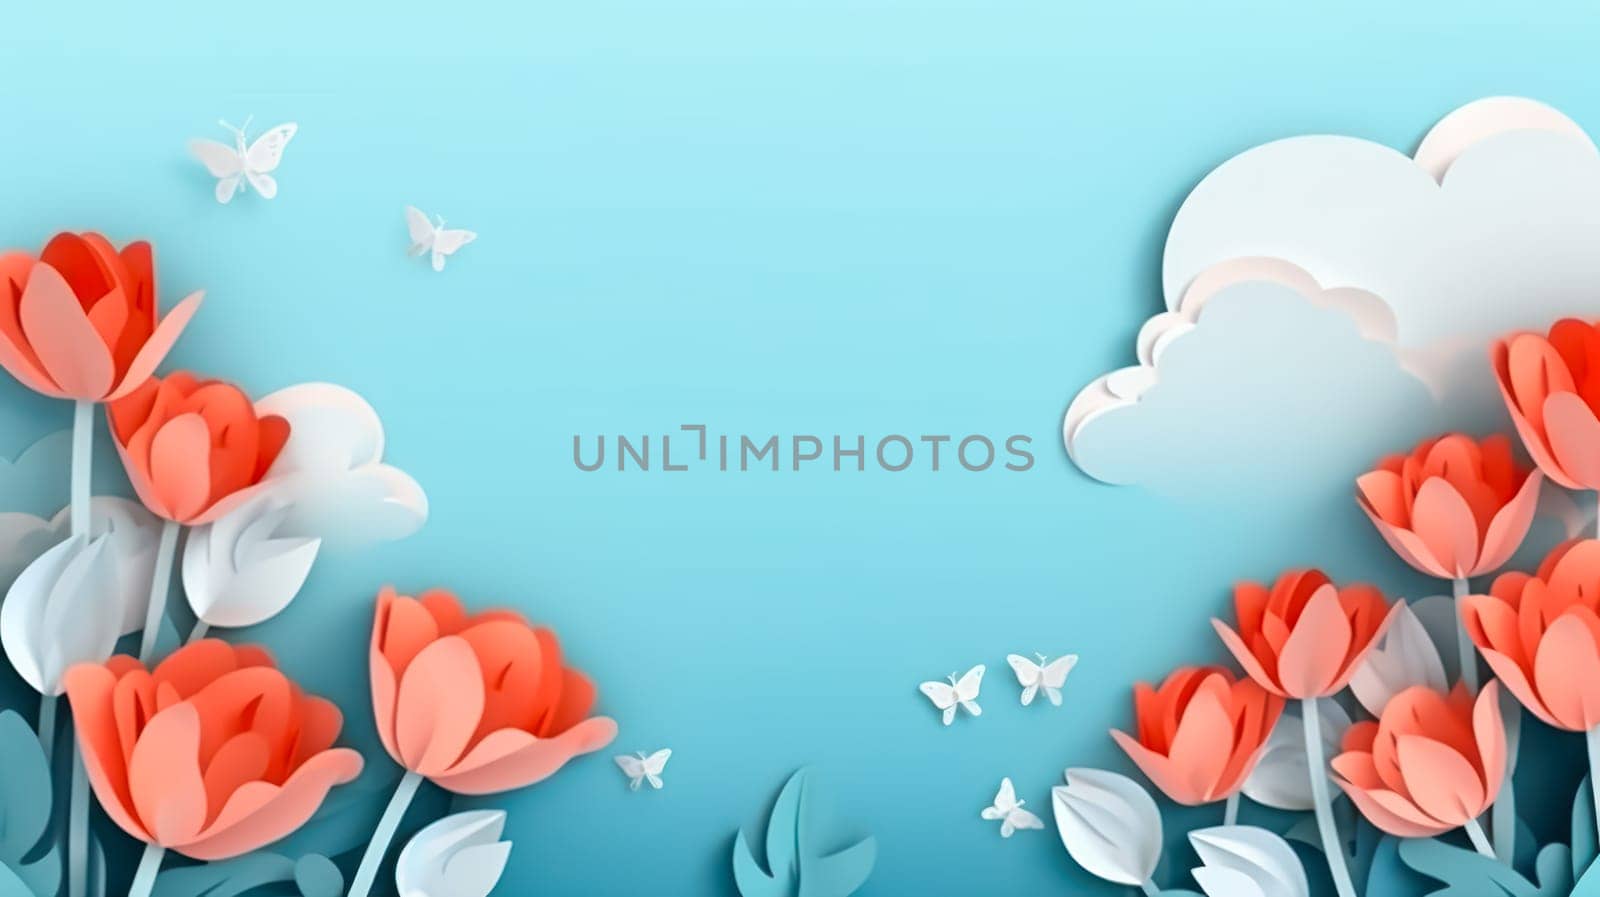 A mesmerizing floral arrangement, beautiful blooming flowers and tulips on a serene blue background. A delicate and vibrant scene, ideal for a variety of design projects and artistic concepts.